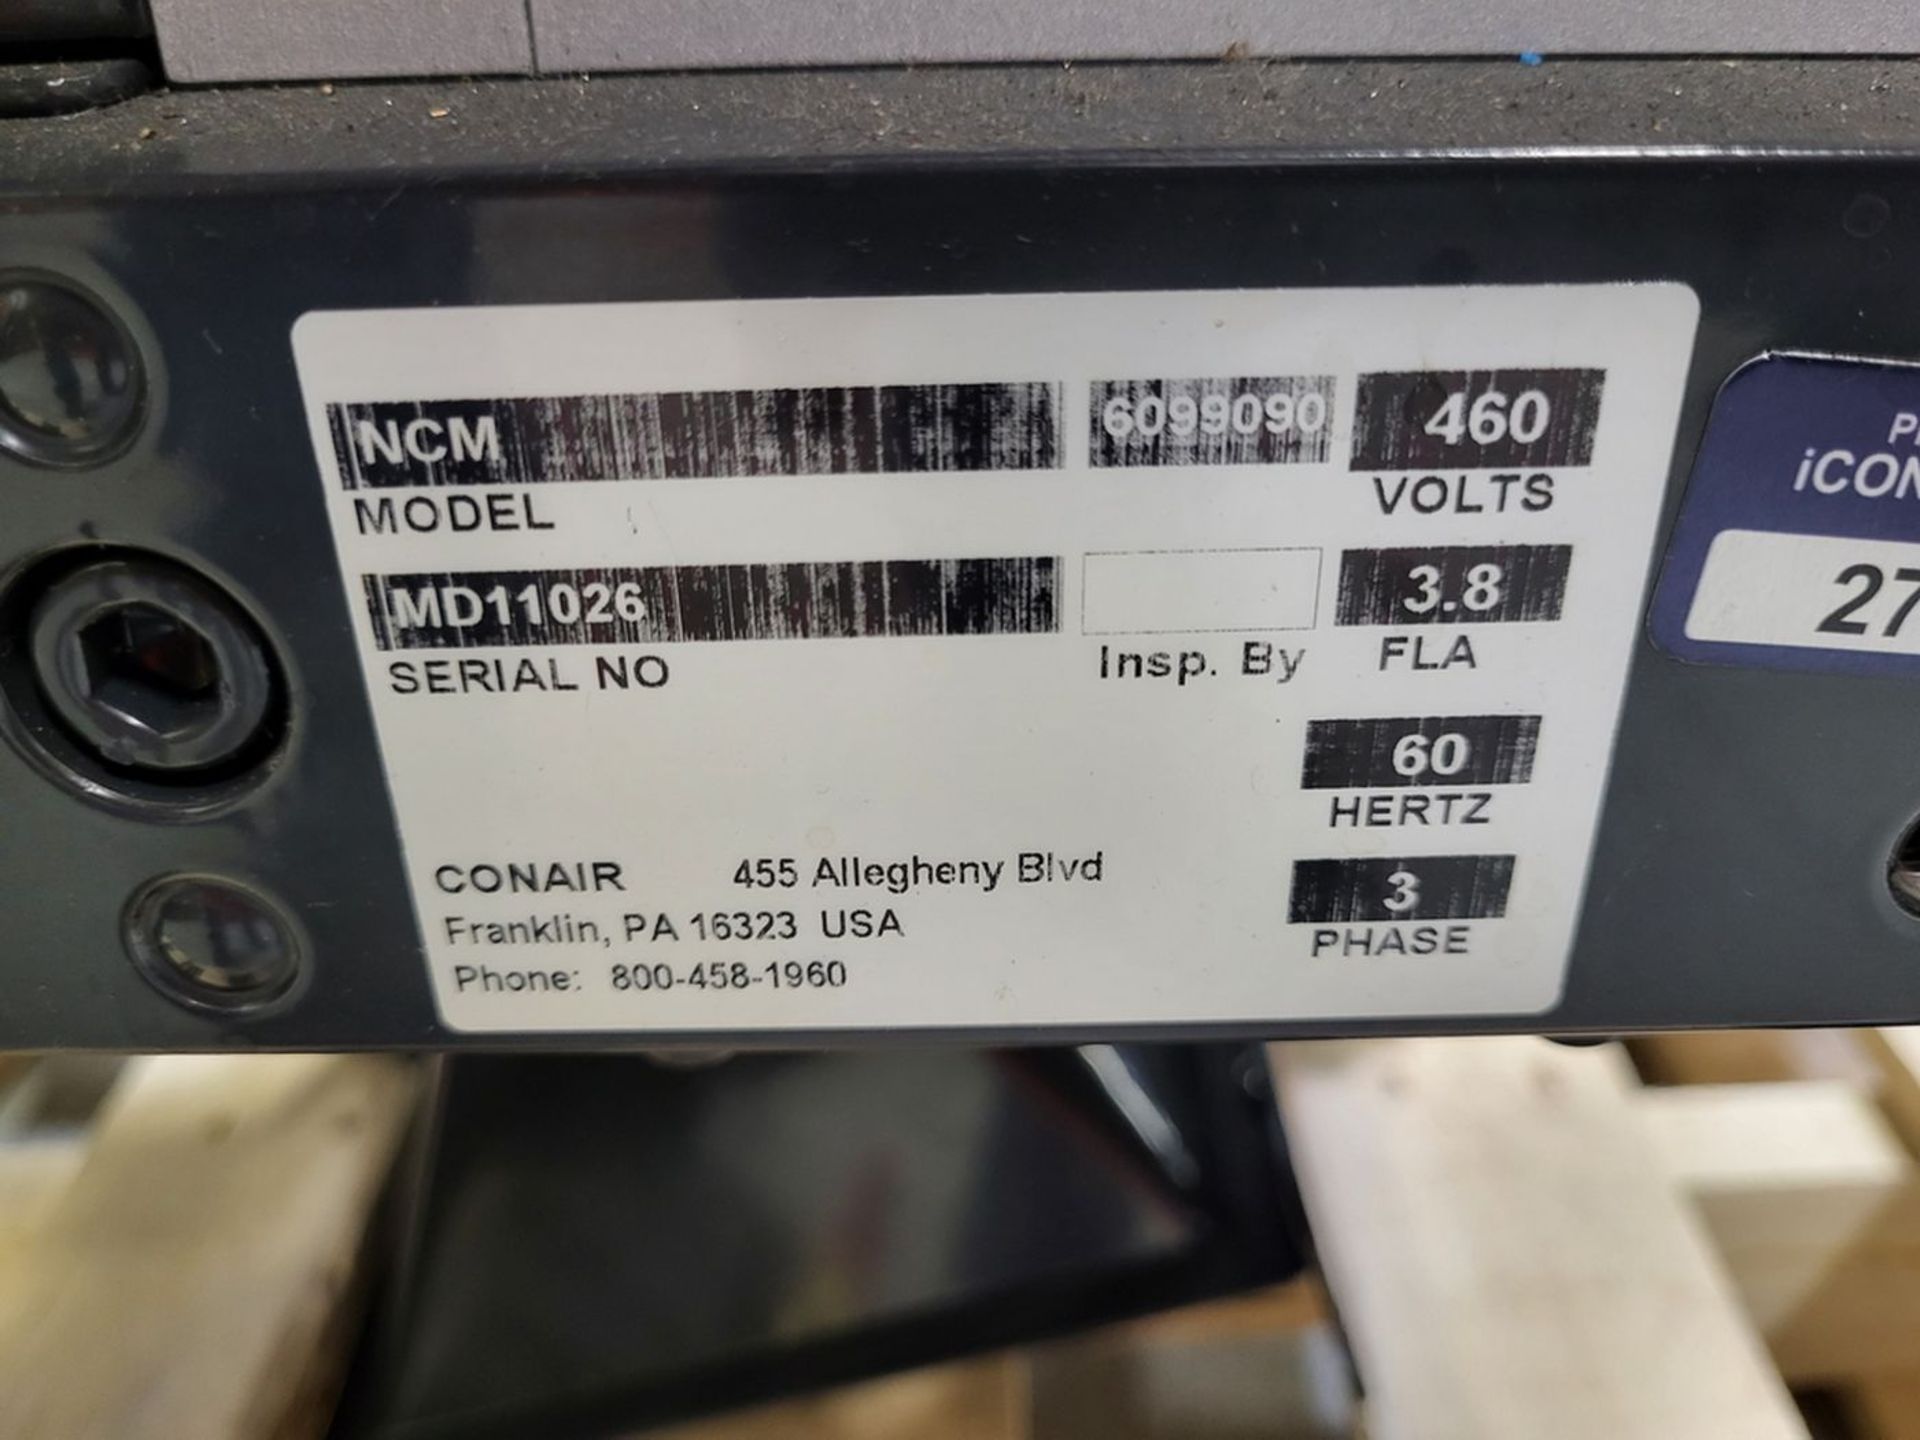 Conair Model NCM Portable Resin Grinder, S/N MD11026; with 9 in. x 9 in. Opening, Bonfiglioli Gear - Image 5 of 5